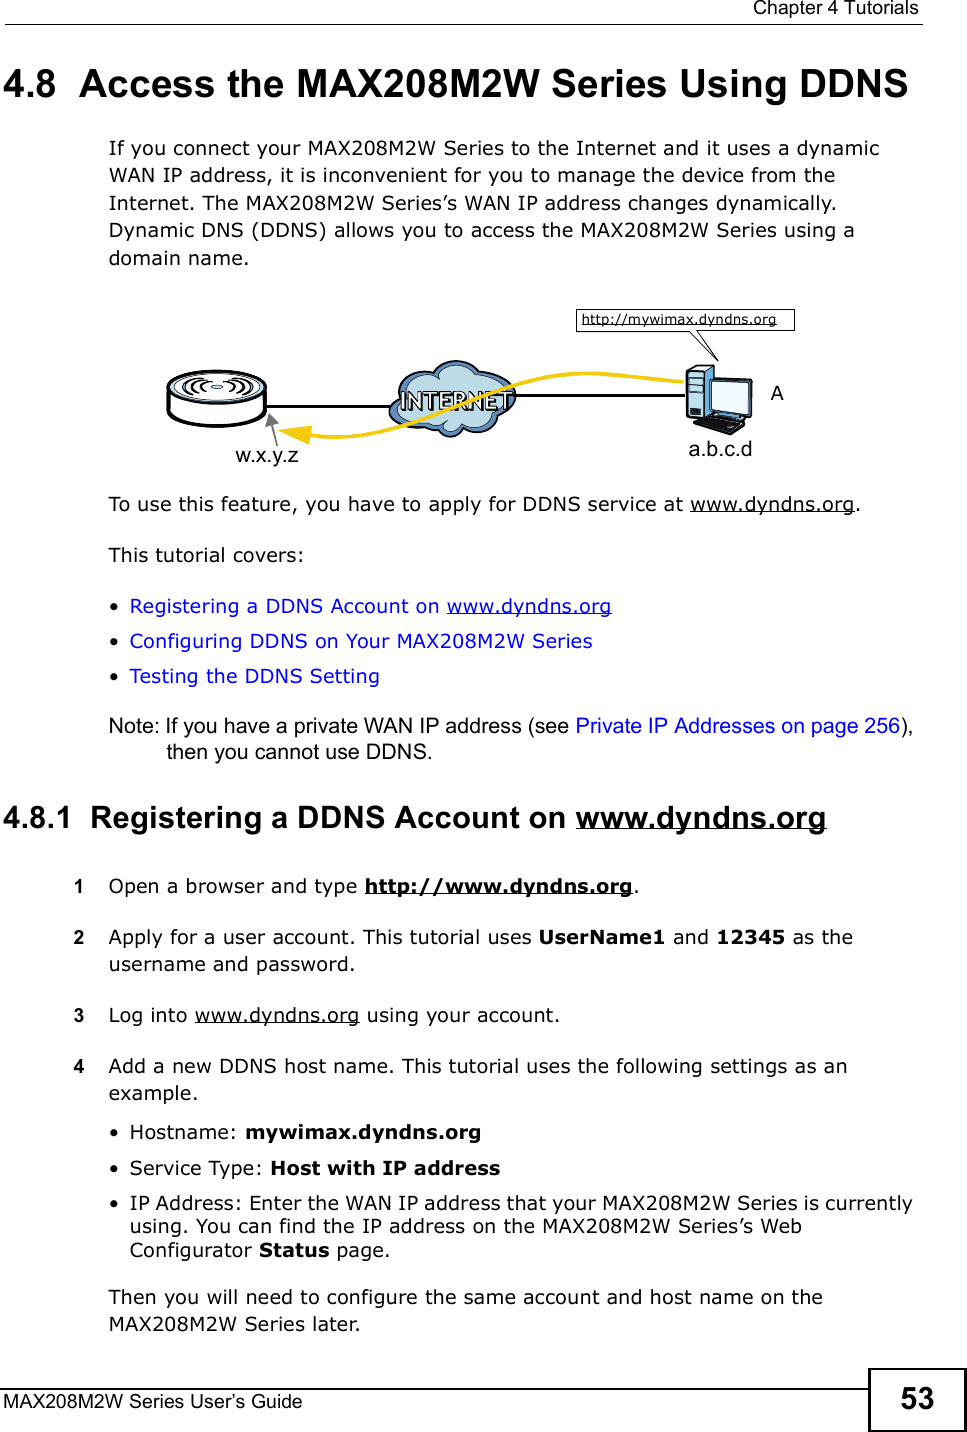  Chapter 4TutorialsMAX208M2W Series User s Guide 534.8  Access the MAX208M2W Series Using DDNSIf you connect your MAX208M2W Series to the Internet and it uses a dynamic WAN IP address, it is inconvenient for you to manage the device from the Internet. The MAX208M2W Series s WAN IP address changes dynamically. Dynamic DNS (DDNS) allows you to access the MAX208M2W Series using a domain name. To use this feature, you have to apply for DDNS service at www.dyndns.org.This tutorial covers:!Registering a DDNS Account on www.dyndns.org!Configuring DDNS on Your MAX208M2W Series!Testing the DDNS SettingNote: If you have a private WAN IP address (see Private IP Addresses on page 256), then you cannot use DDNS.4.8.1  Registering a DDNS Account on www.dyndns.org1Open a browser and type http://www.dyndns.org.2Apply for a user account. This tutorial uses UserName1 and 12345 as the username and password.3Log into www.dyndns.org using your account.4Add a new DDNS host name. This tutorial uses the following settings as an example.!Hostname: mywimax.dyndns.org!Service Type: Host with IP address!IP Address: Enter the WAN IP address that your MAX208M2W Series is currently using. You can find the IP address on the MAX208M2W Series s Web Configurator Status page.Then you will need to configure the same account and host name on the MAX208M2W Series later.w.x.y.z a.b.c.dhttp://mywimax.dyndns.orgA